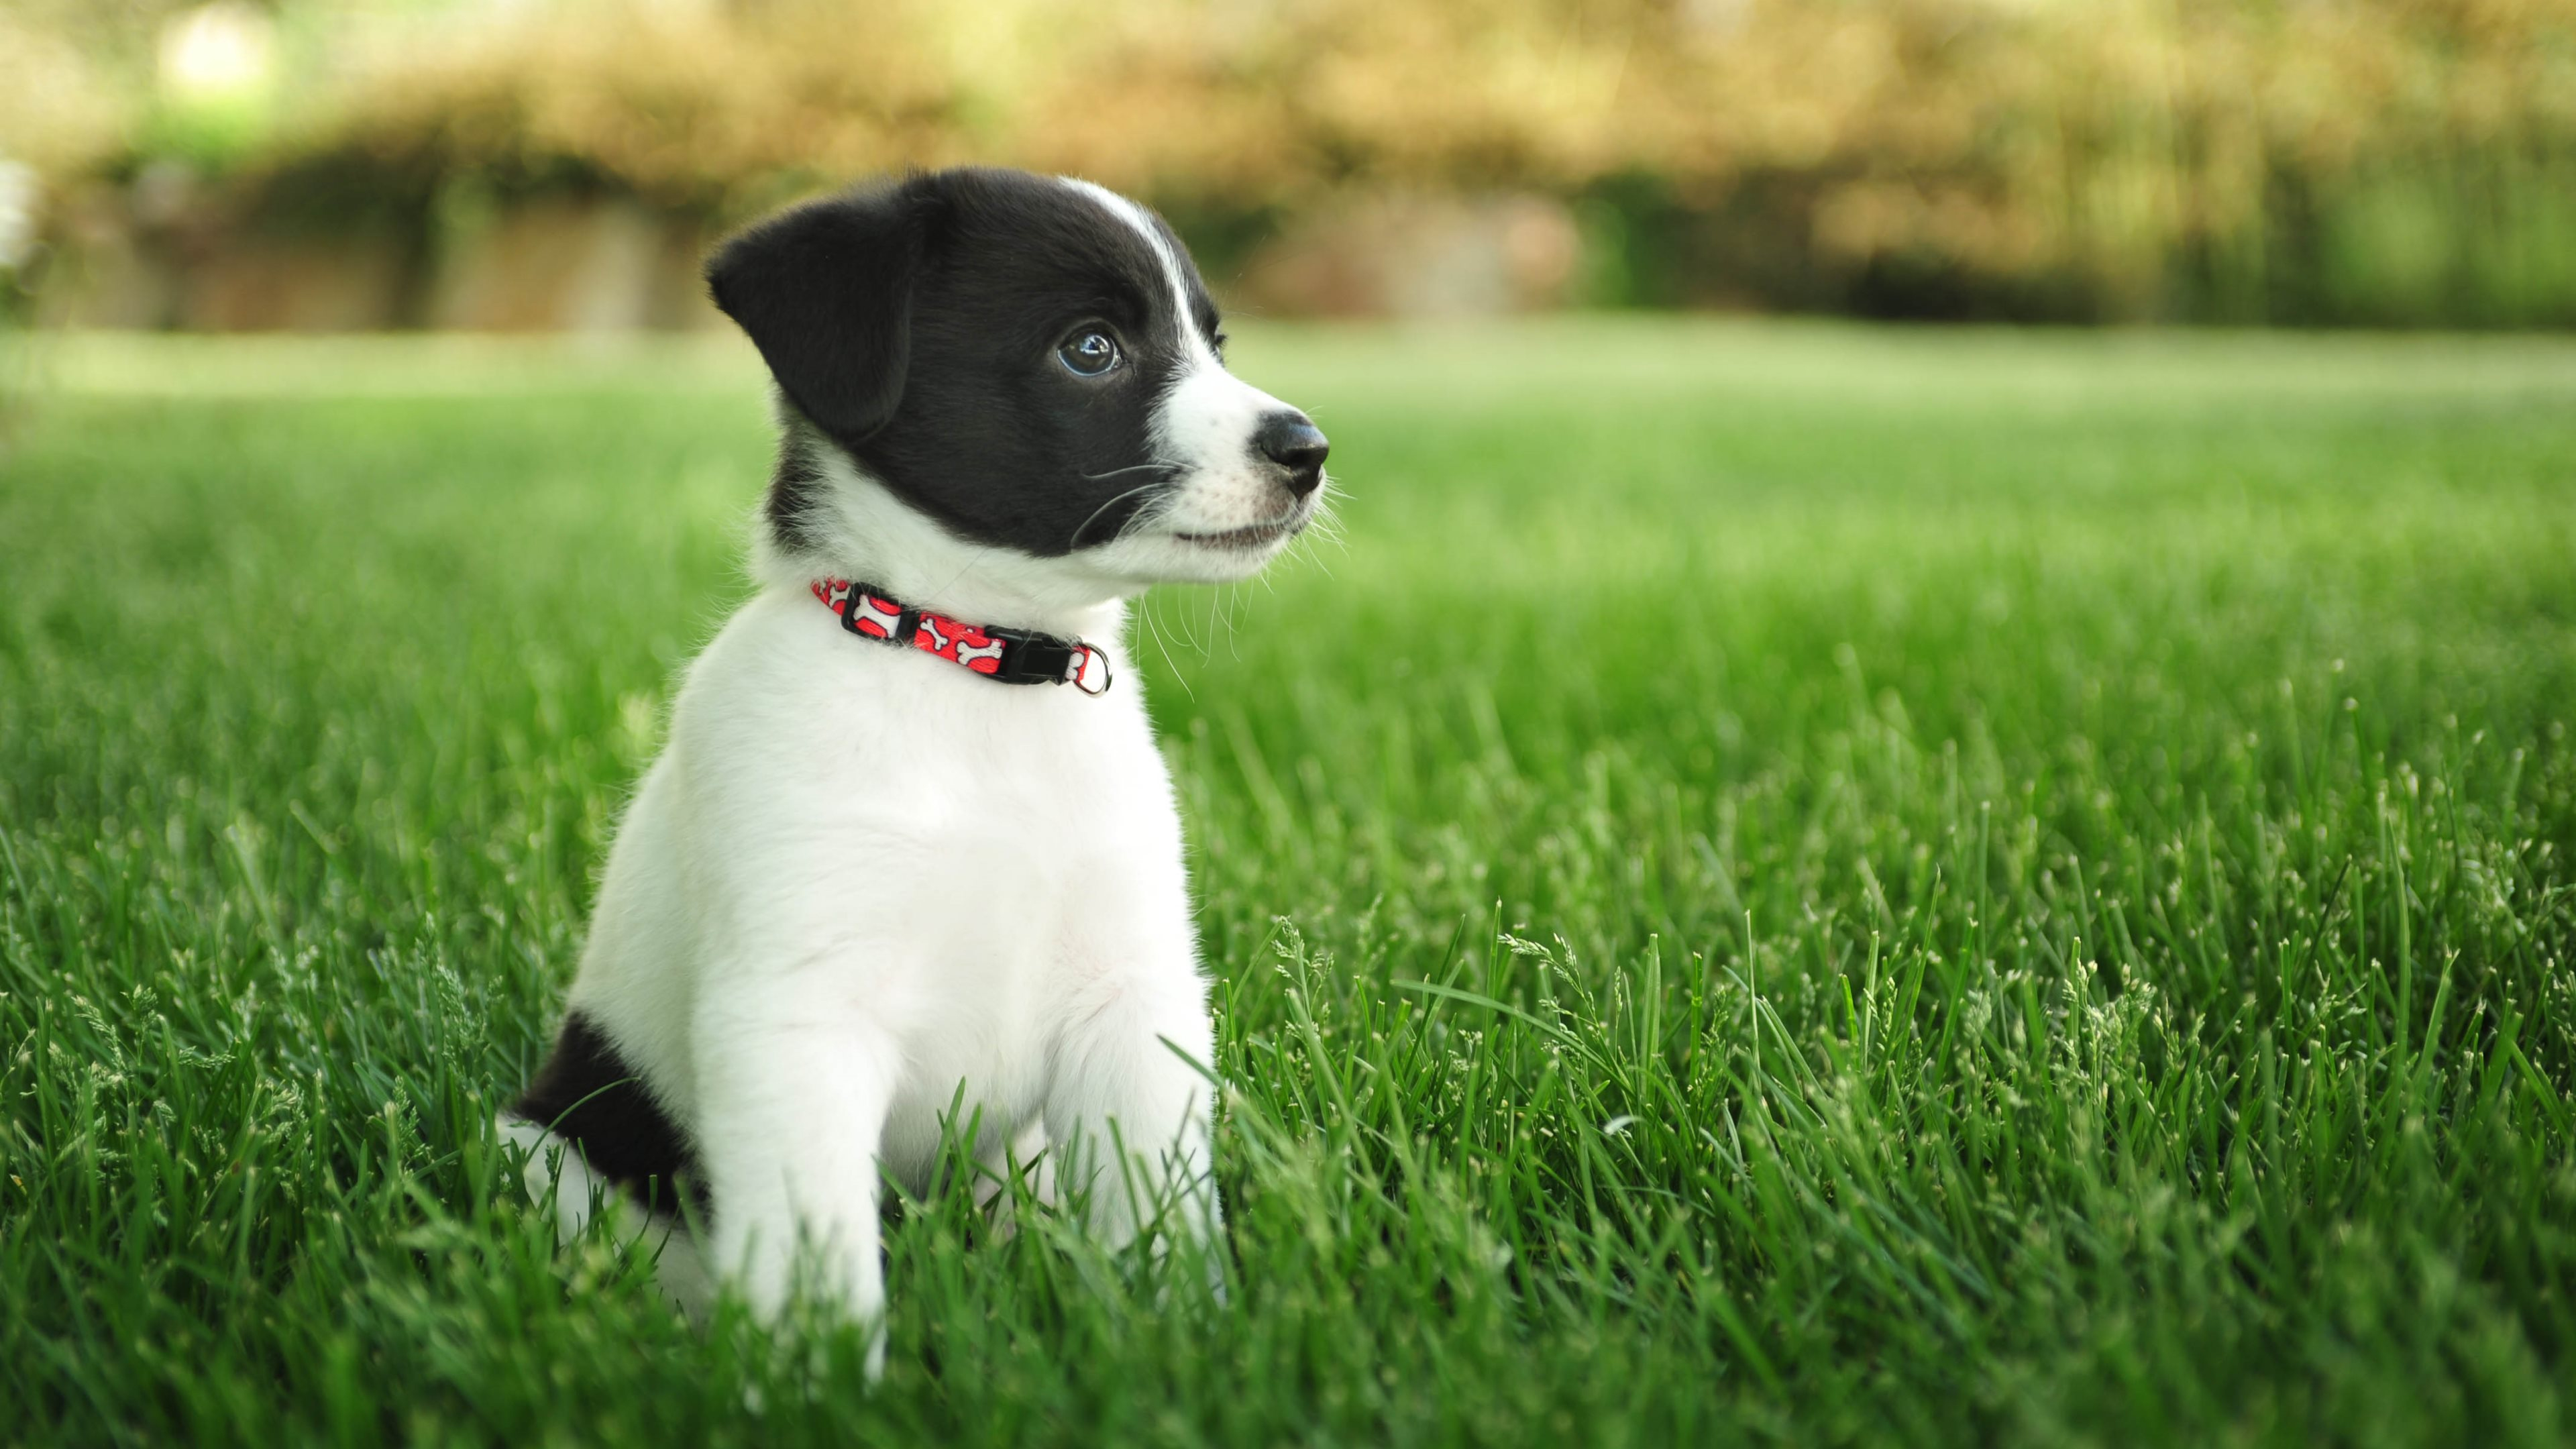 3840x2160 660+ Puppy HD Wallpapers and Backgrounds